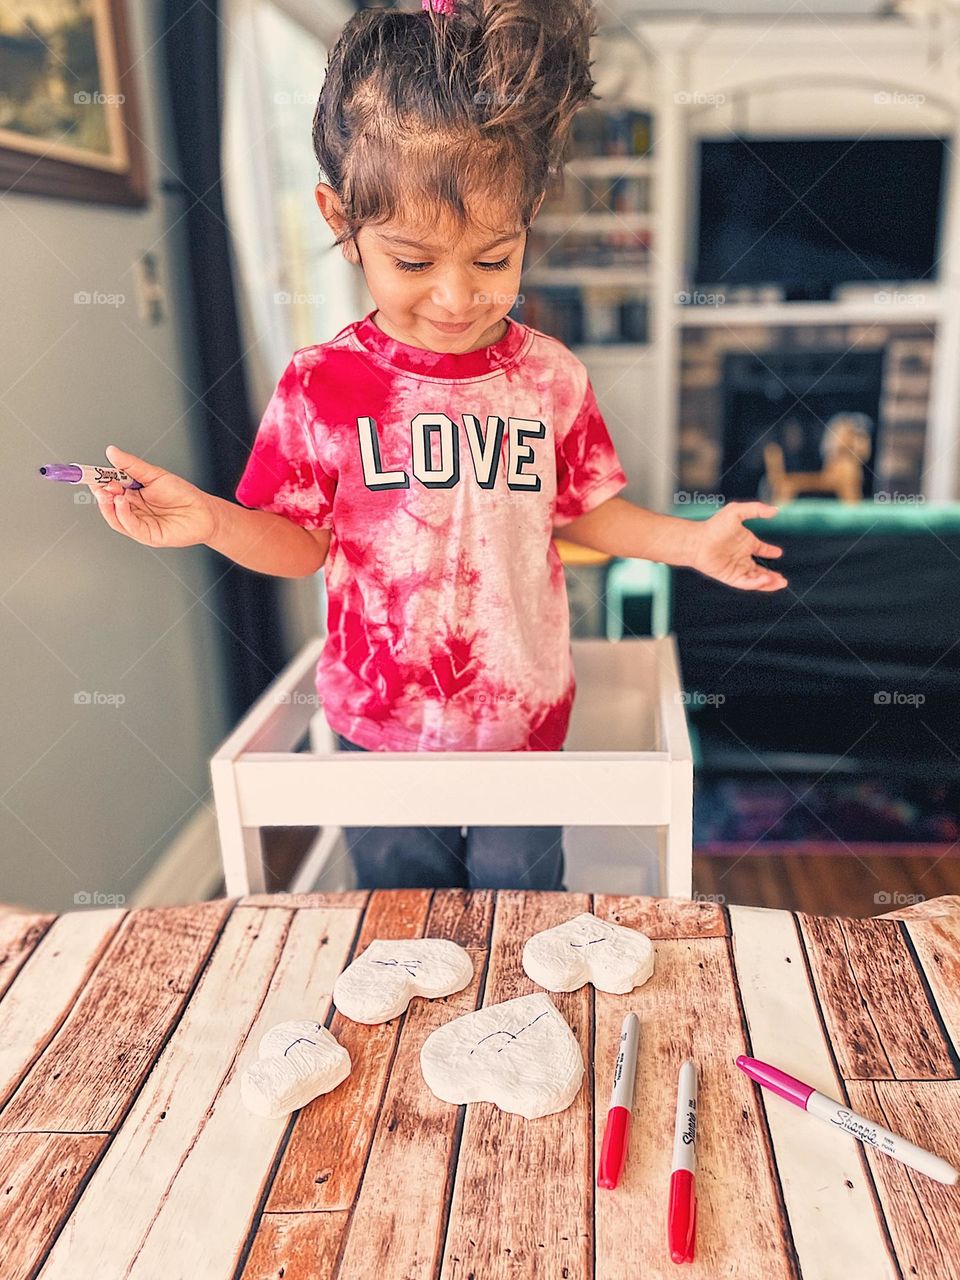 Toddler showing emotion of happiness, child smiling with happiness, toddler is smiling and proud of herself, child making heart Valentines Day gifts, child smiling while showing off work, child making crafts for Valentine’s Day, toddler showing off